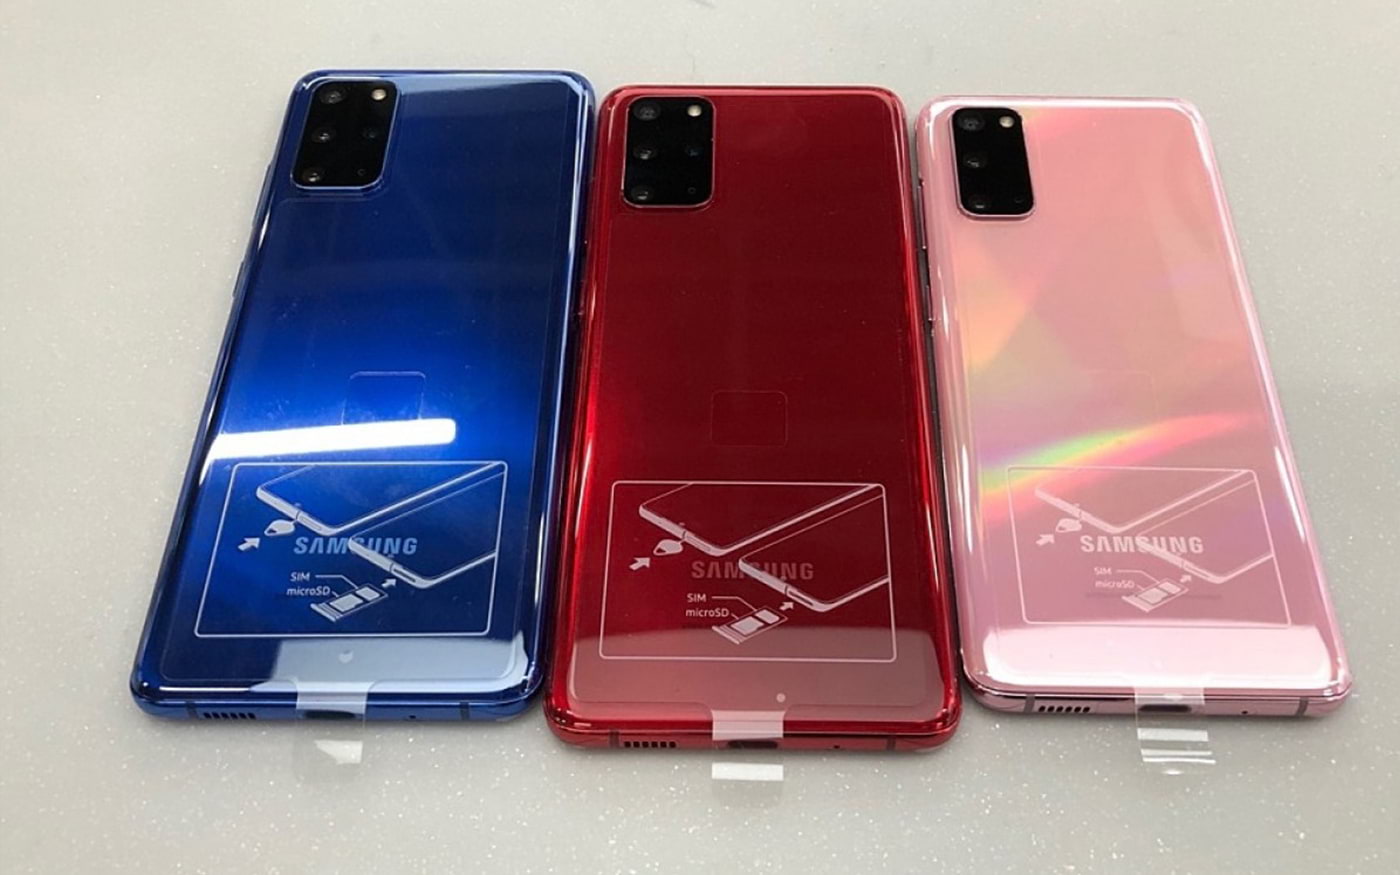 Galaxy S20 and S20 + should get new color options